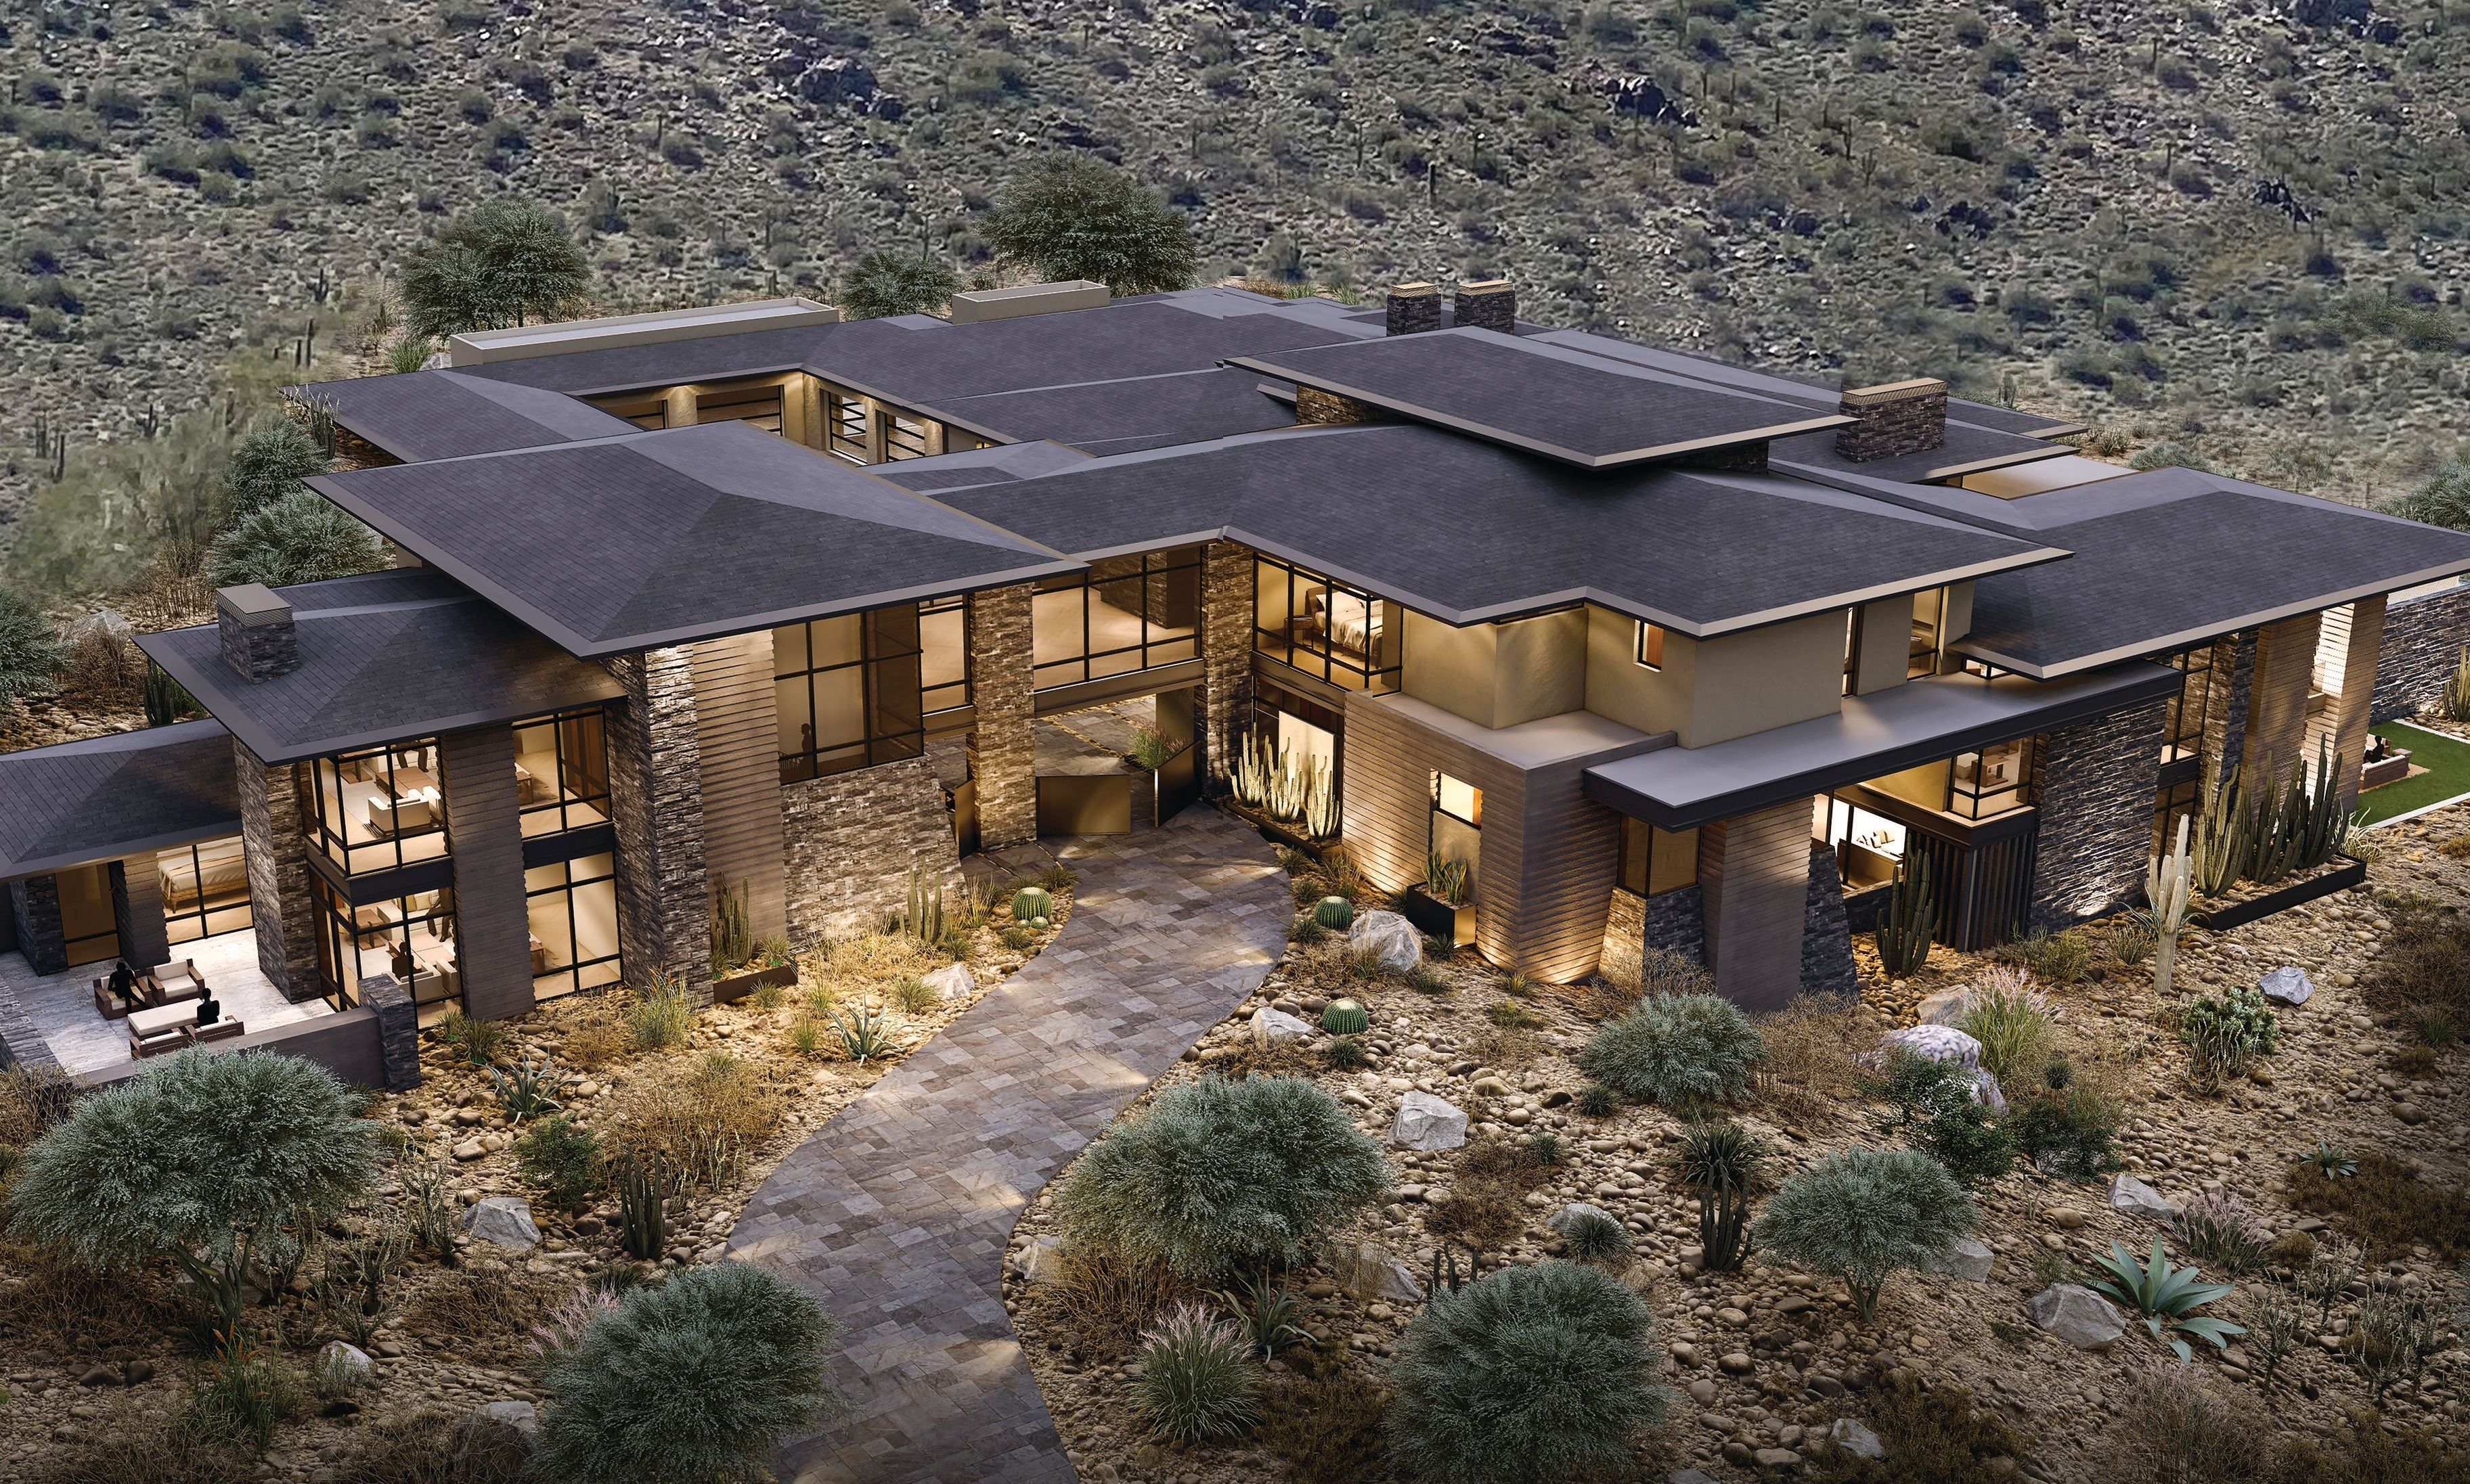 RENDERINGS COURTESY OF RUSS LYON SOTHEBY’S INTERNATIONAL REALTY